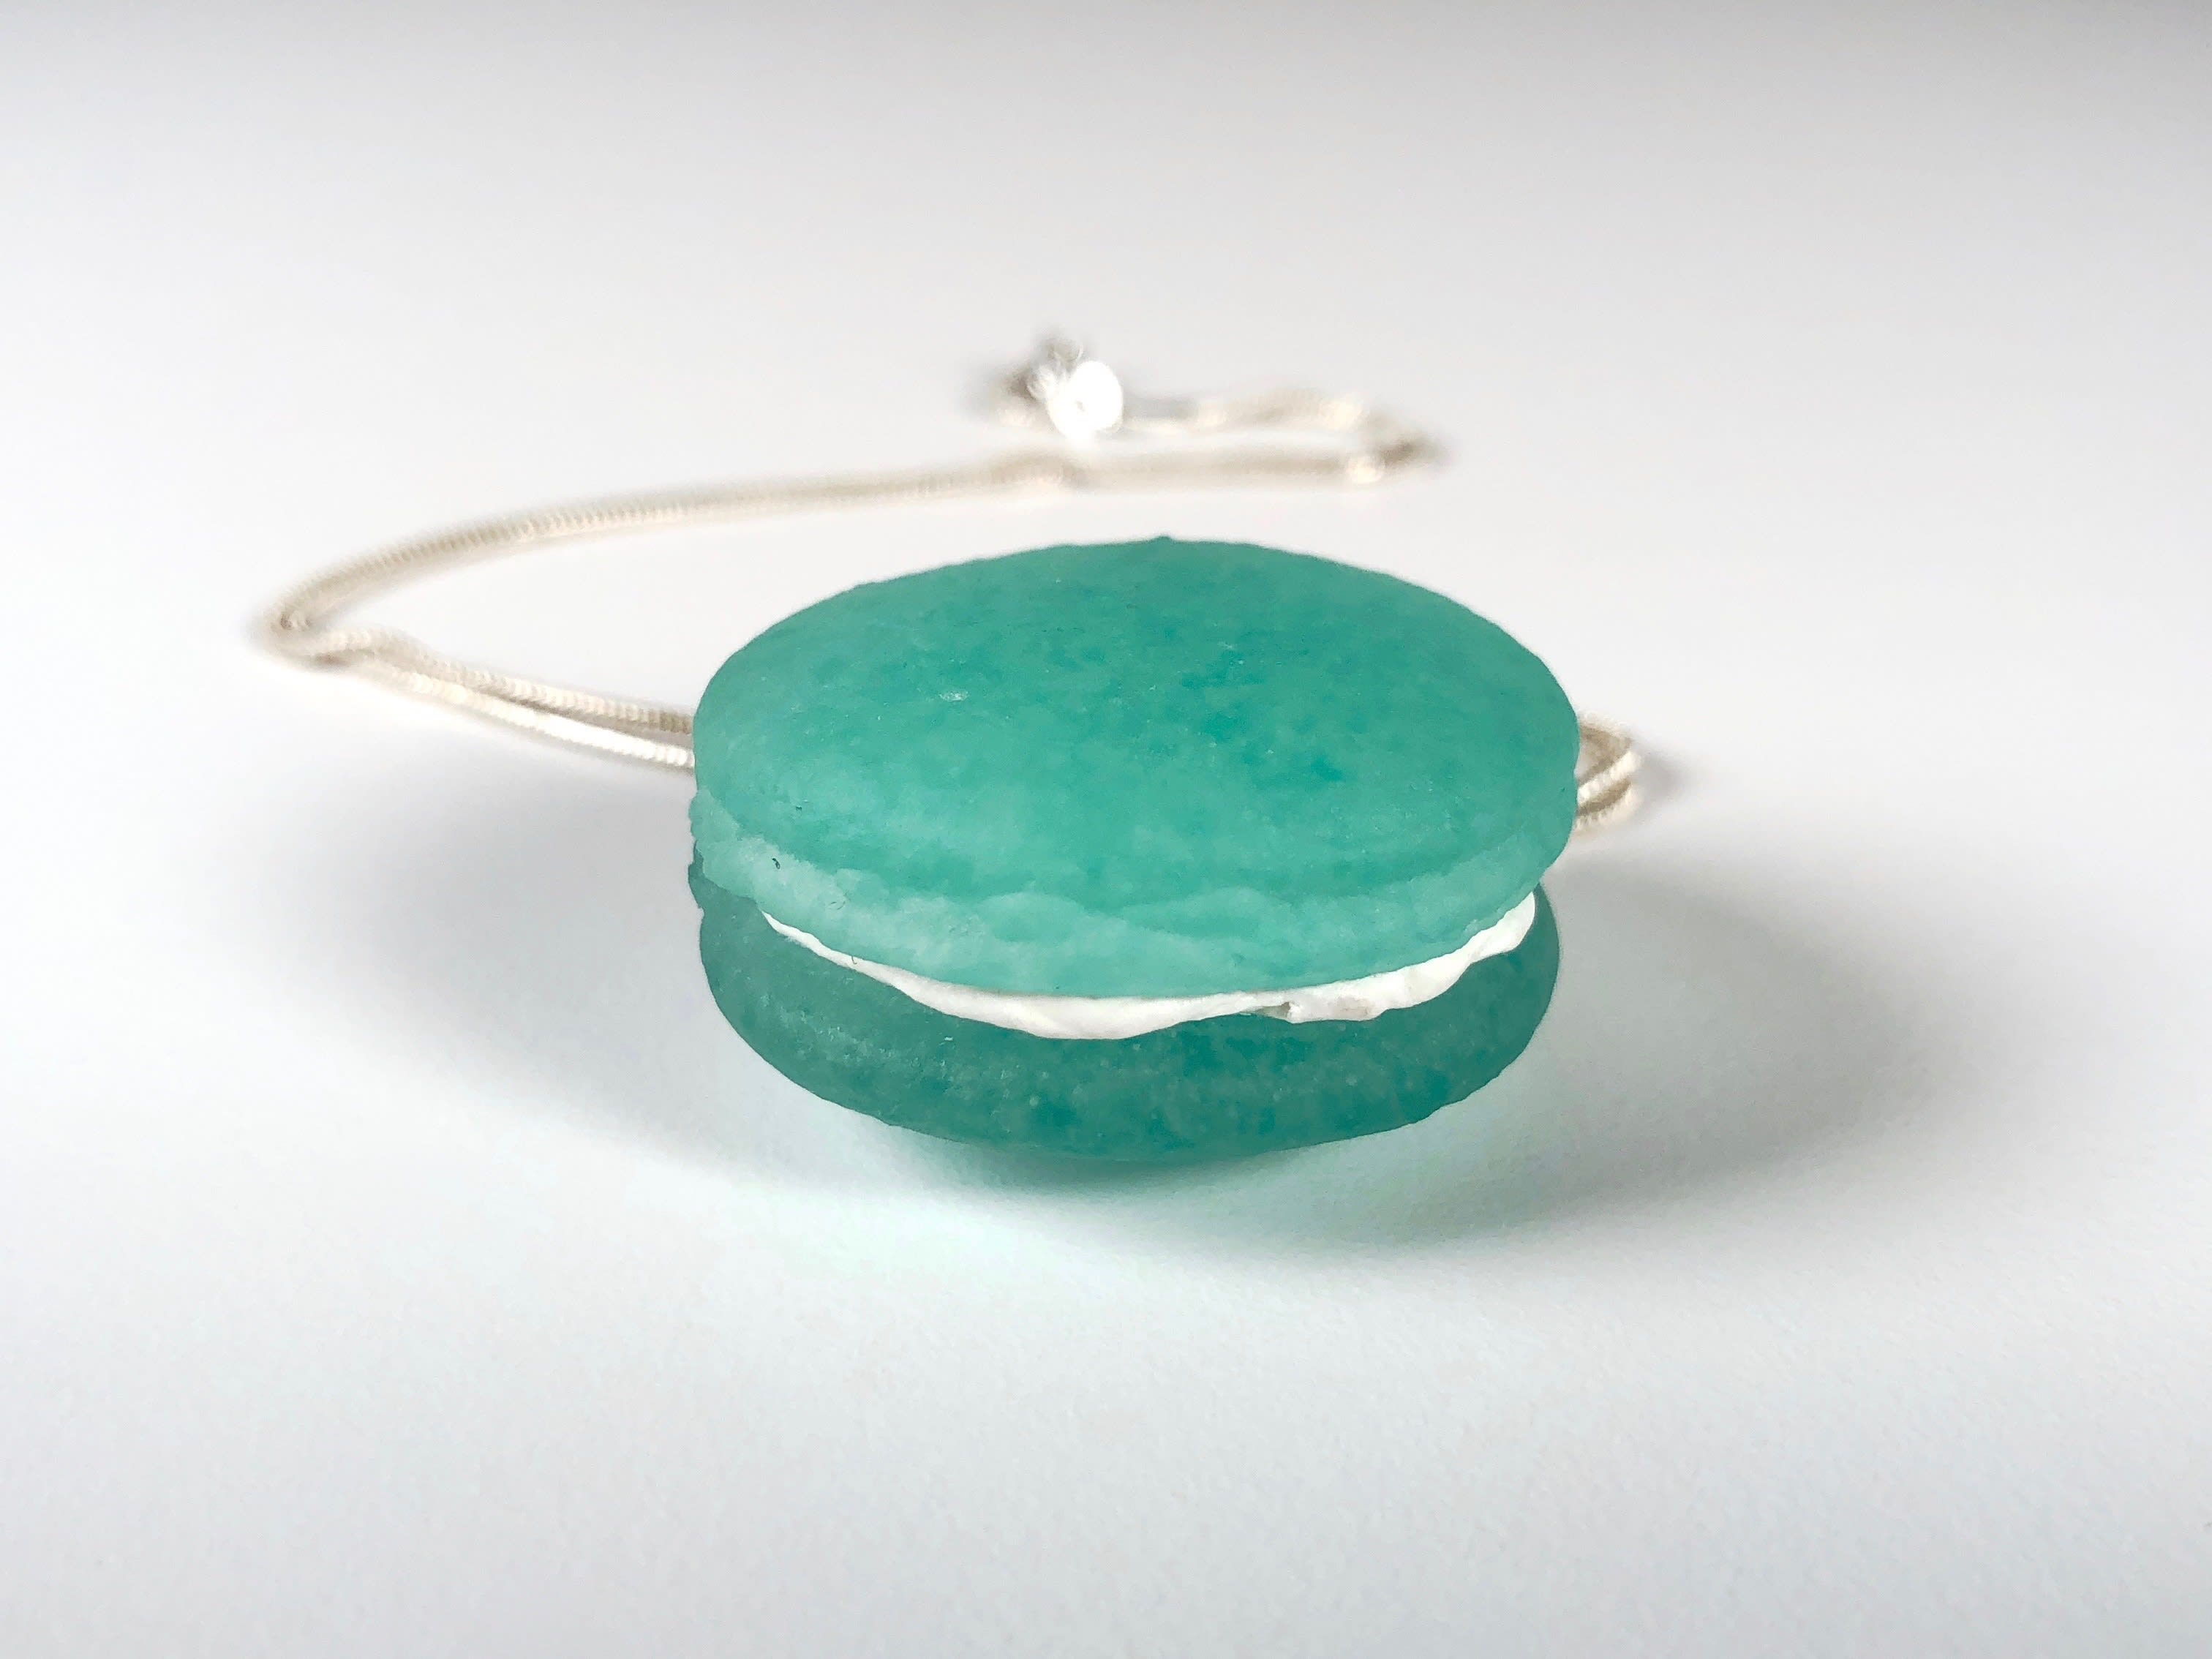 Meredith Edmondson, Turquoise Macaron Necklace, kilnformed glass, sterling silver chain